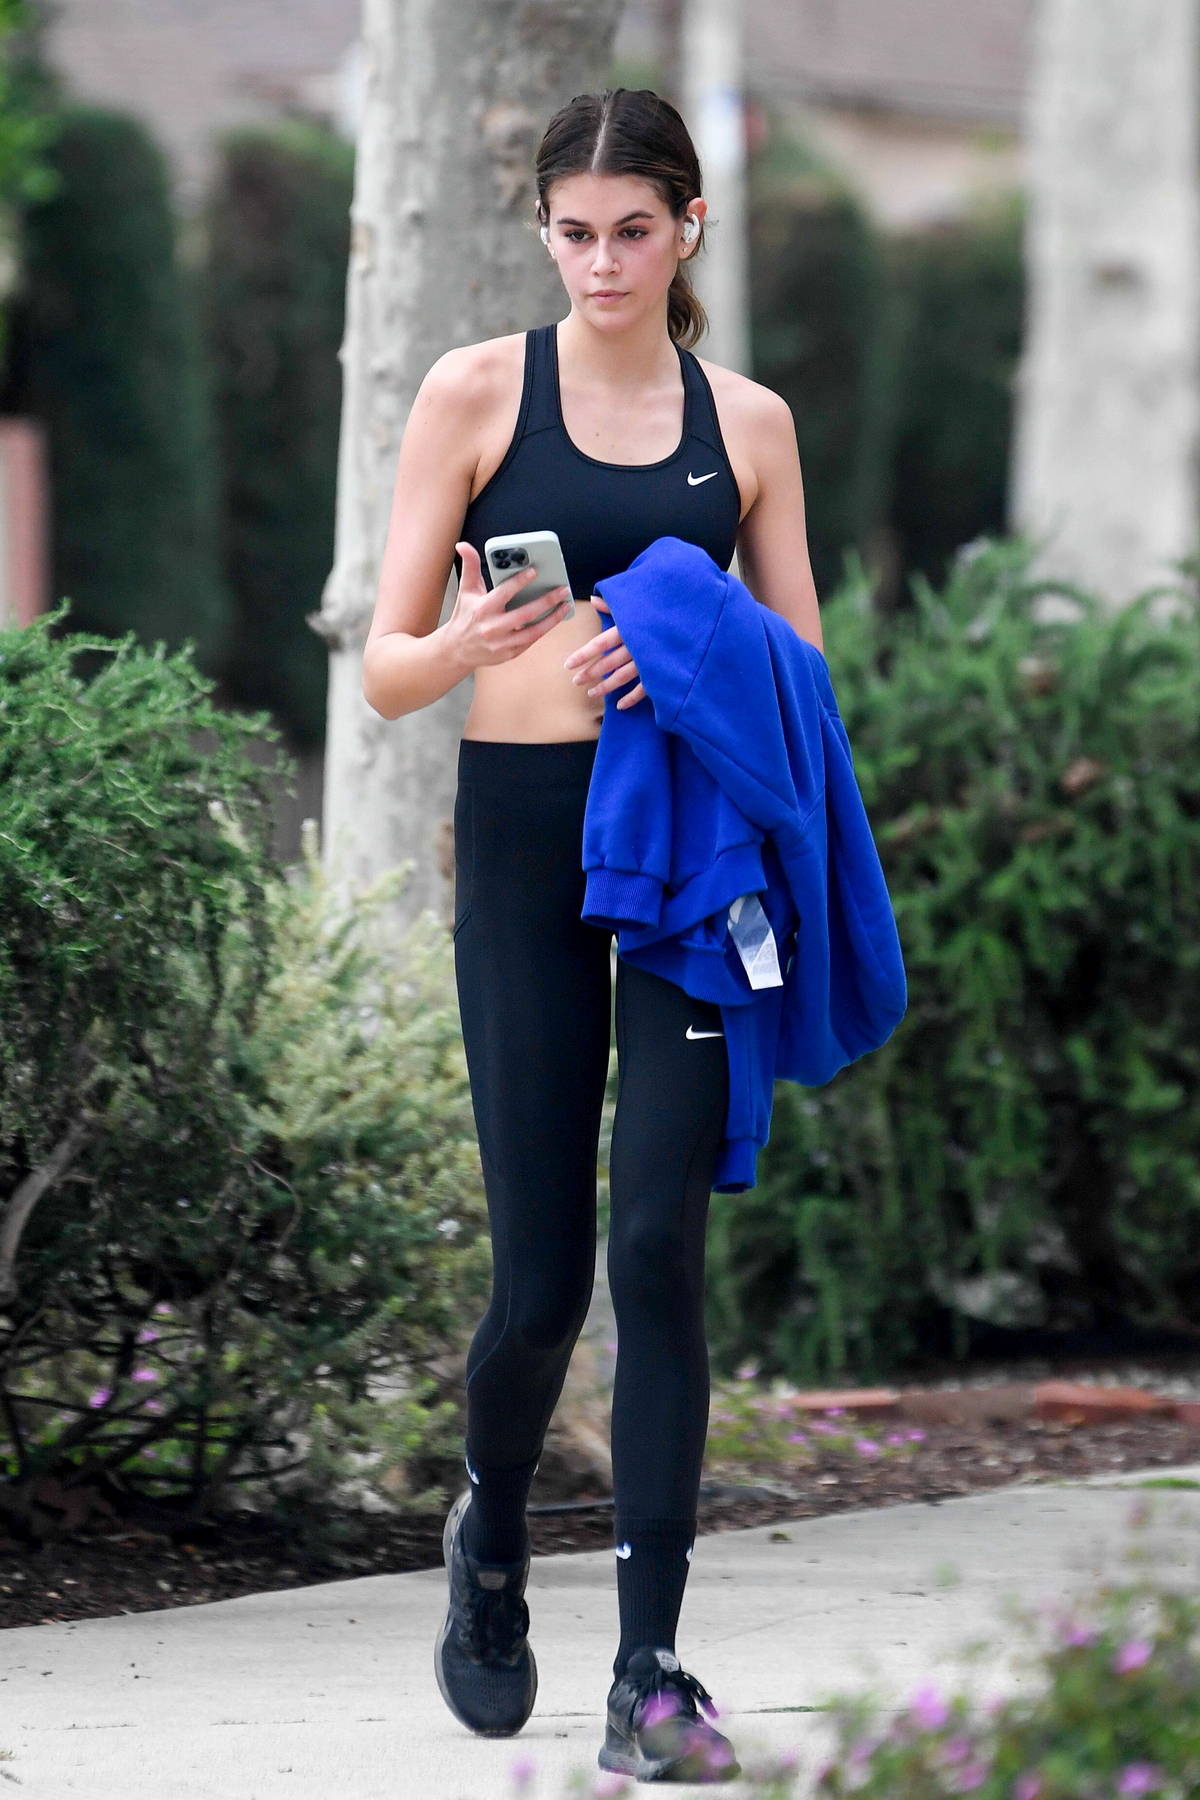 Kaia Gerber Shows Off Her Slender Figure In A Black Sports Bra And Leggings While Leaving A